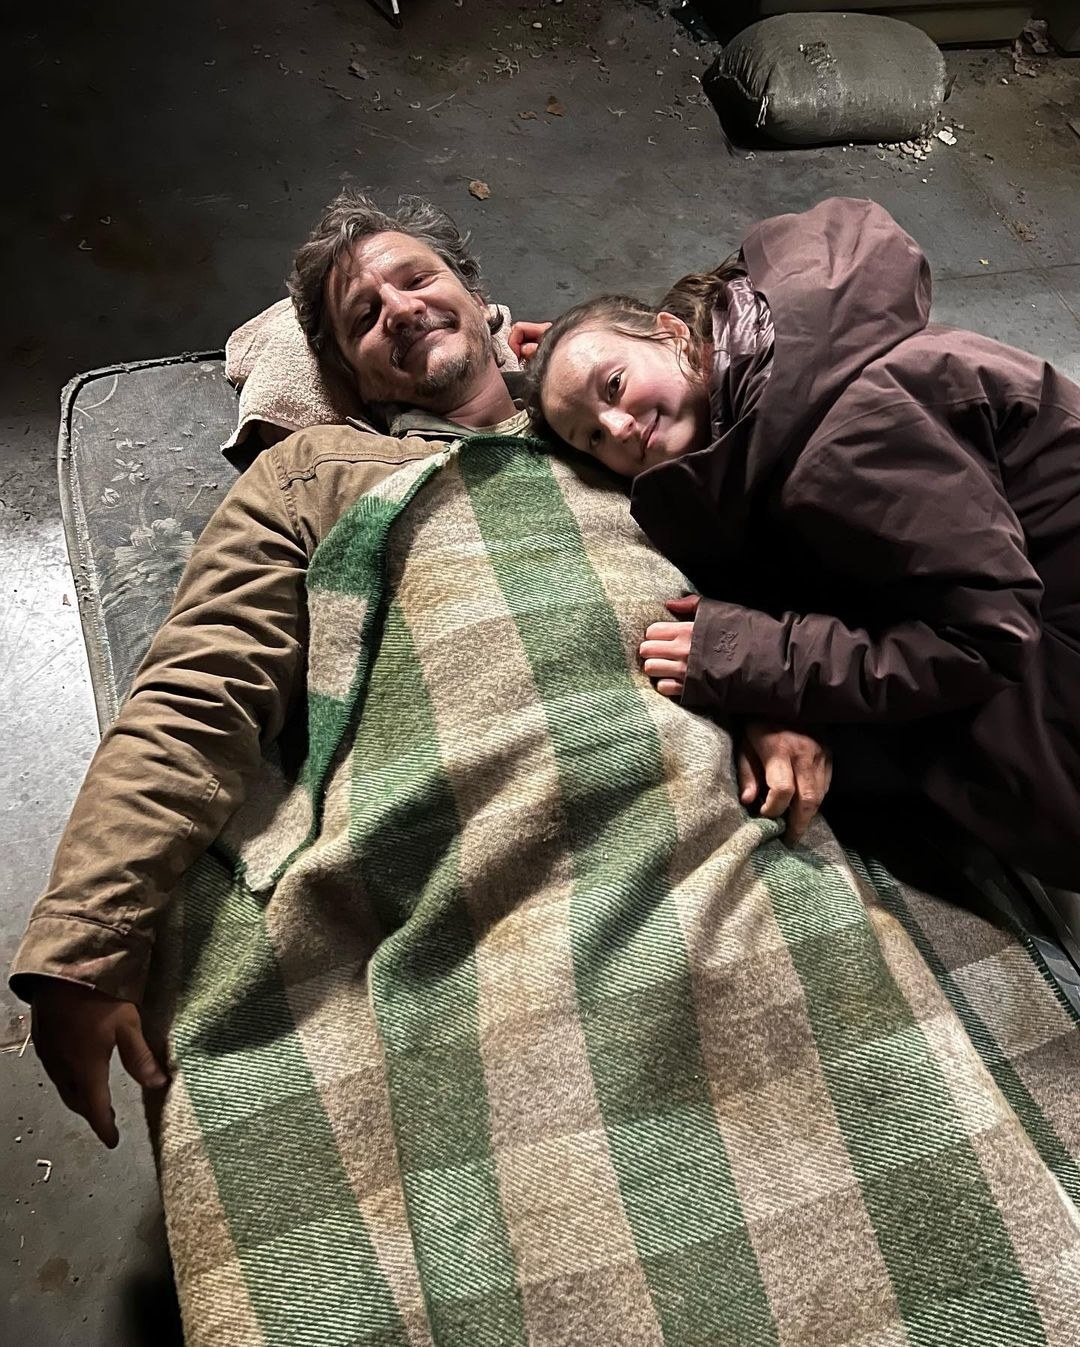 the two cuddled up while on set on a dirty blanket and mattress